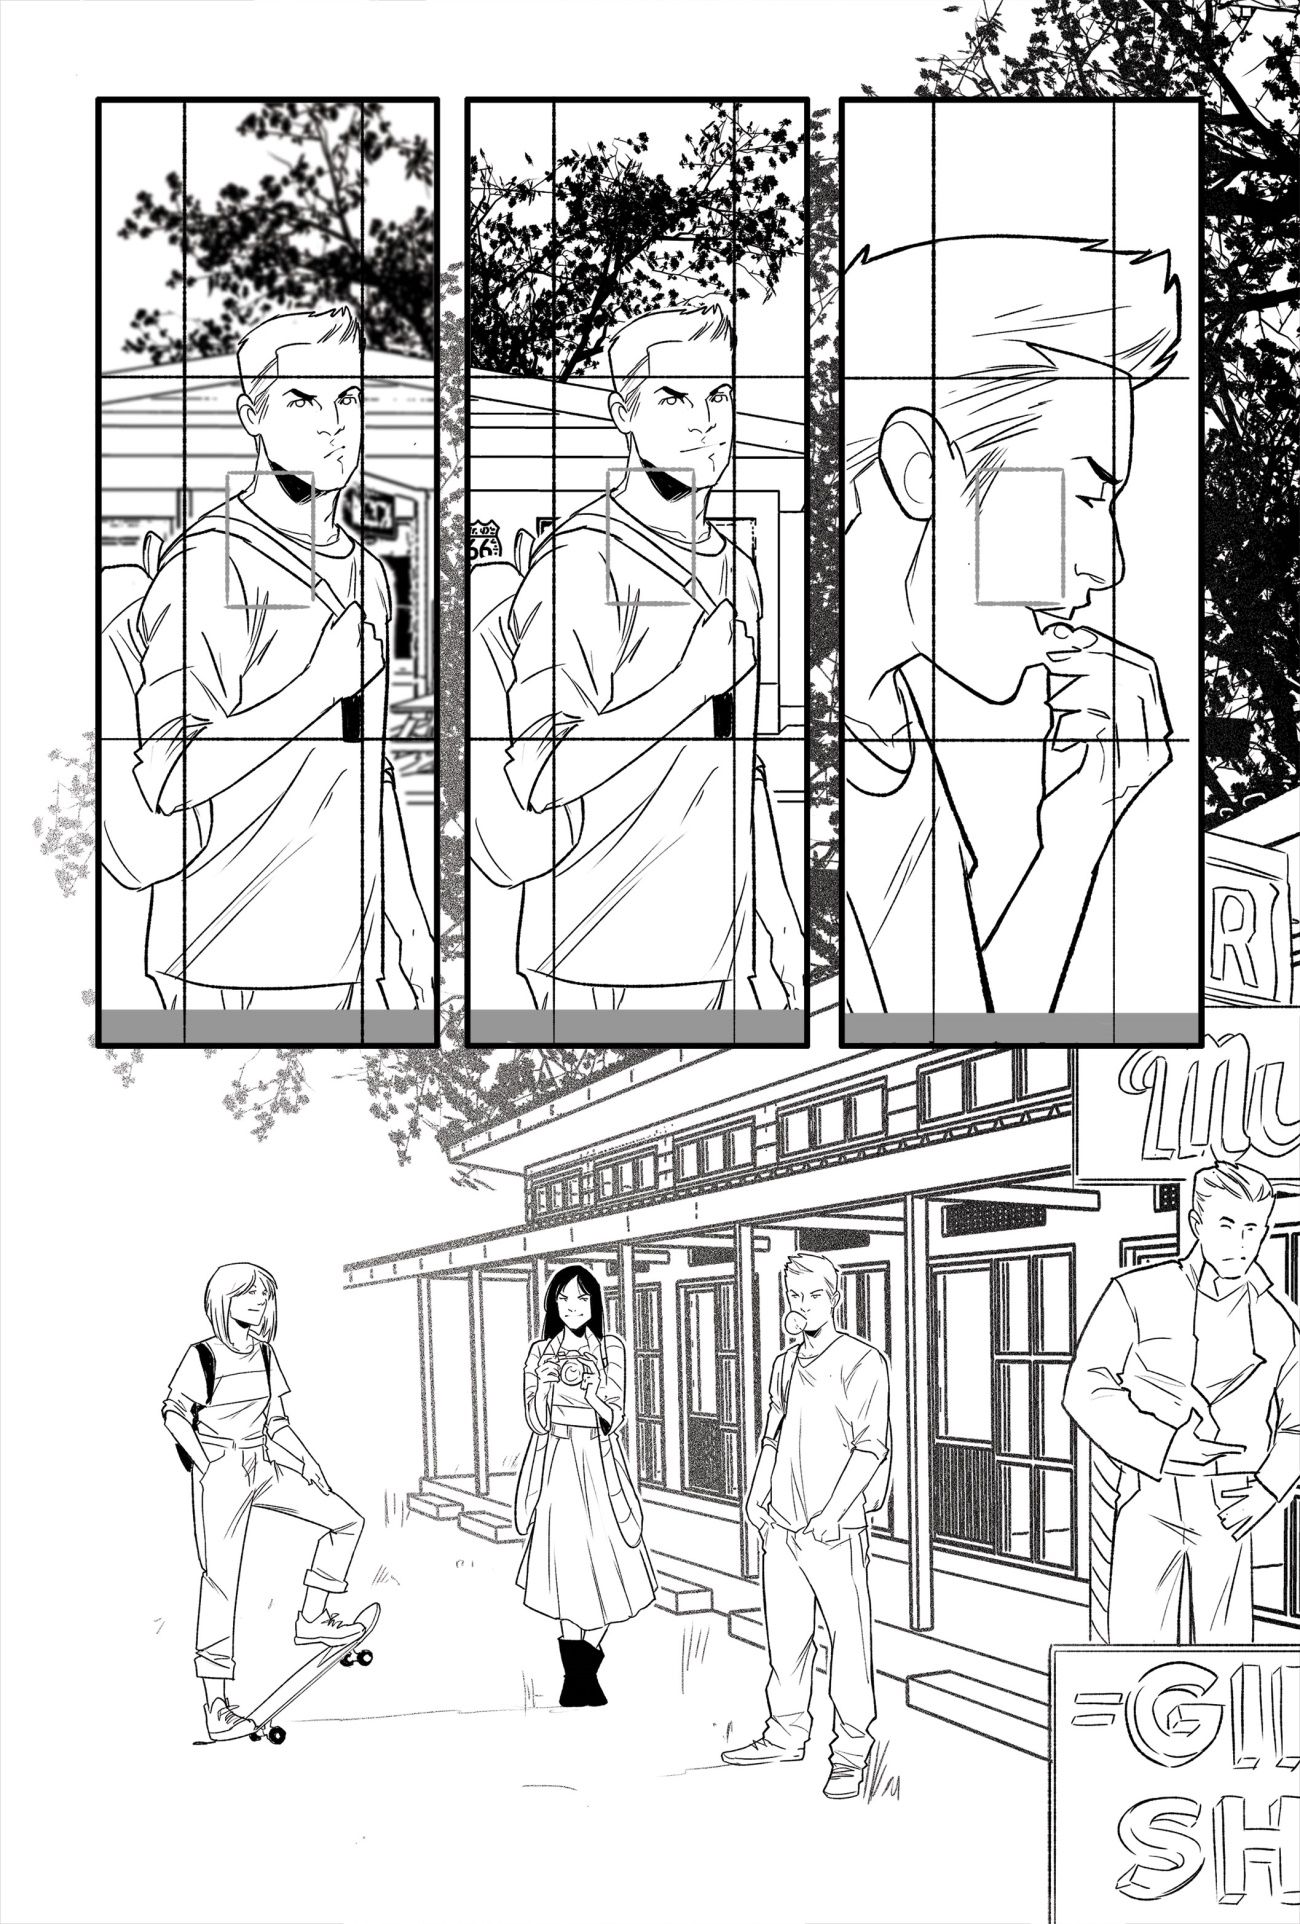 Jill and the Killers #1 from Oni Press, black & white preview page